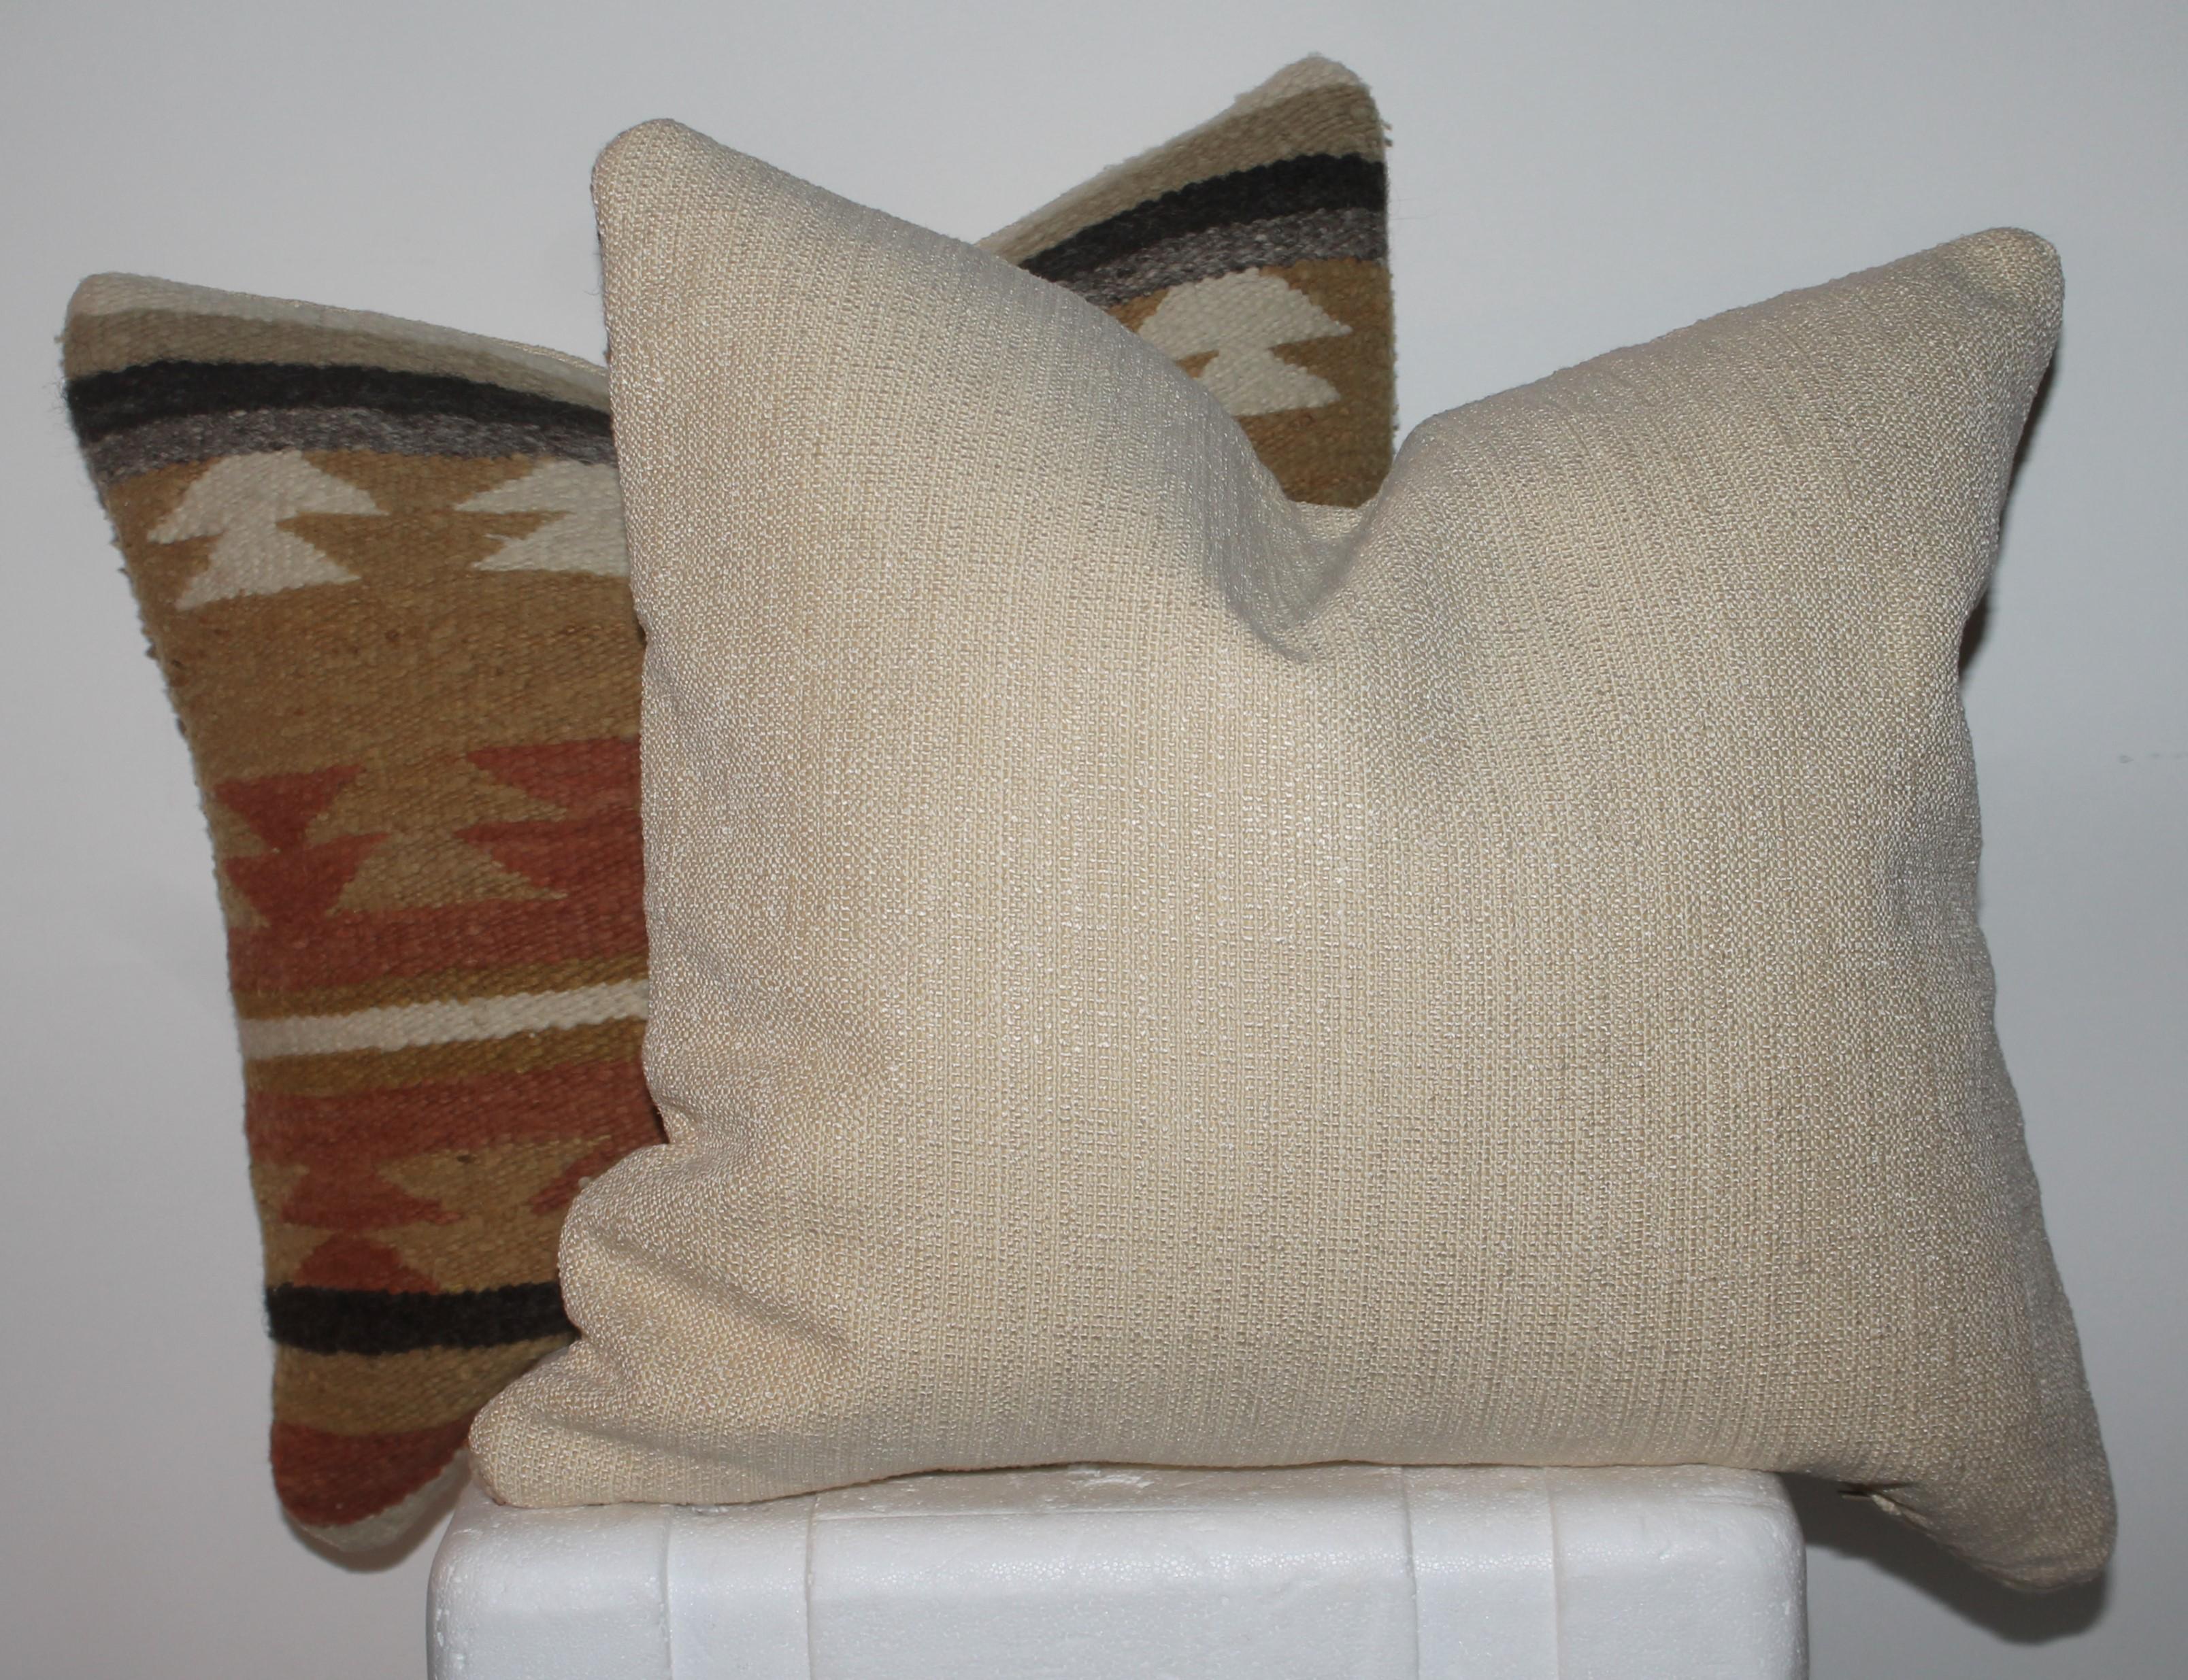 These fine handwoven Navajo Indian weaving pillows are in pristine condition and have cotton linen backings. The inserts are down & feather fill.